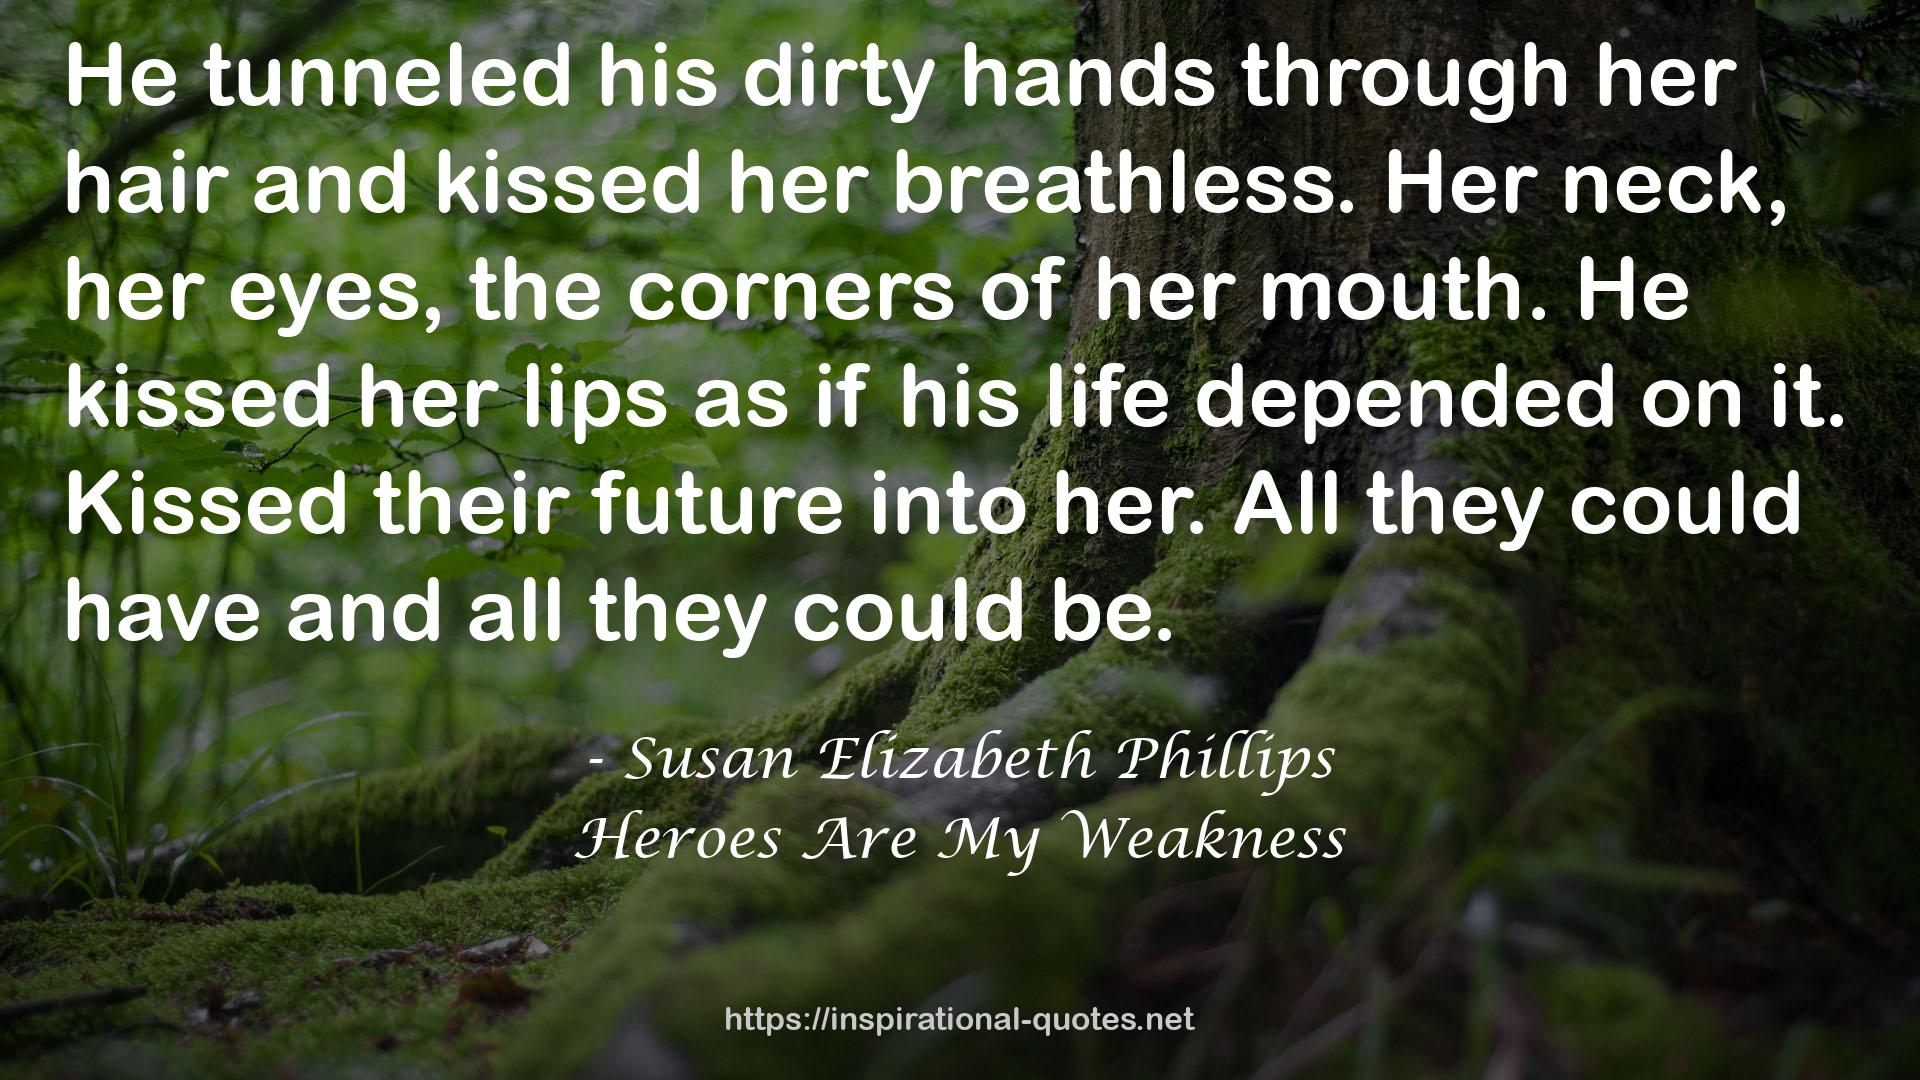 Heroes Are My Weakness QUOTES